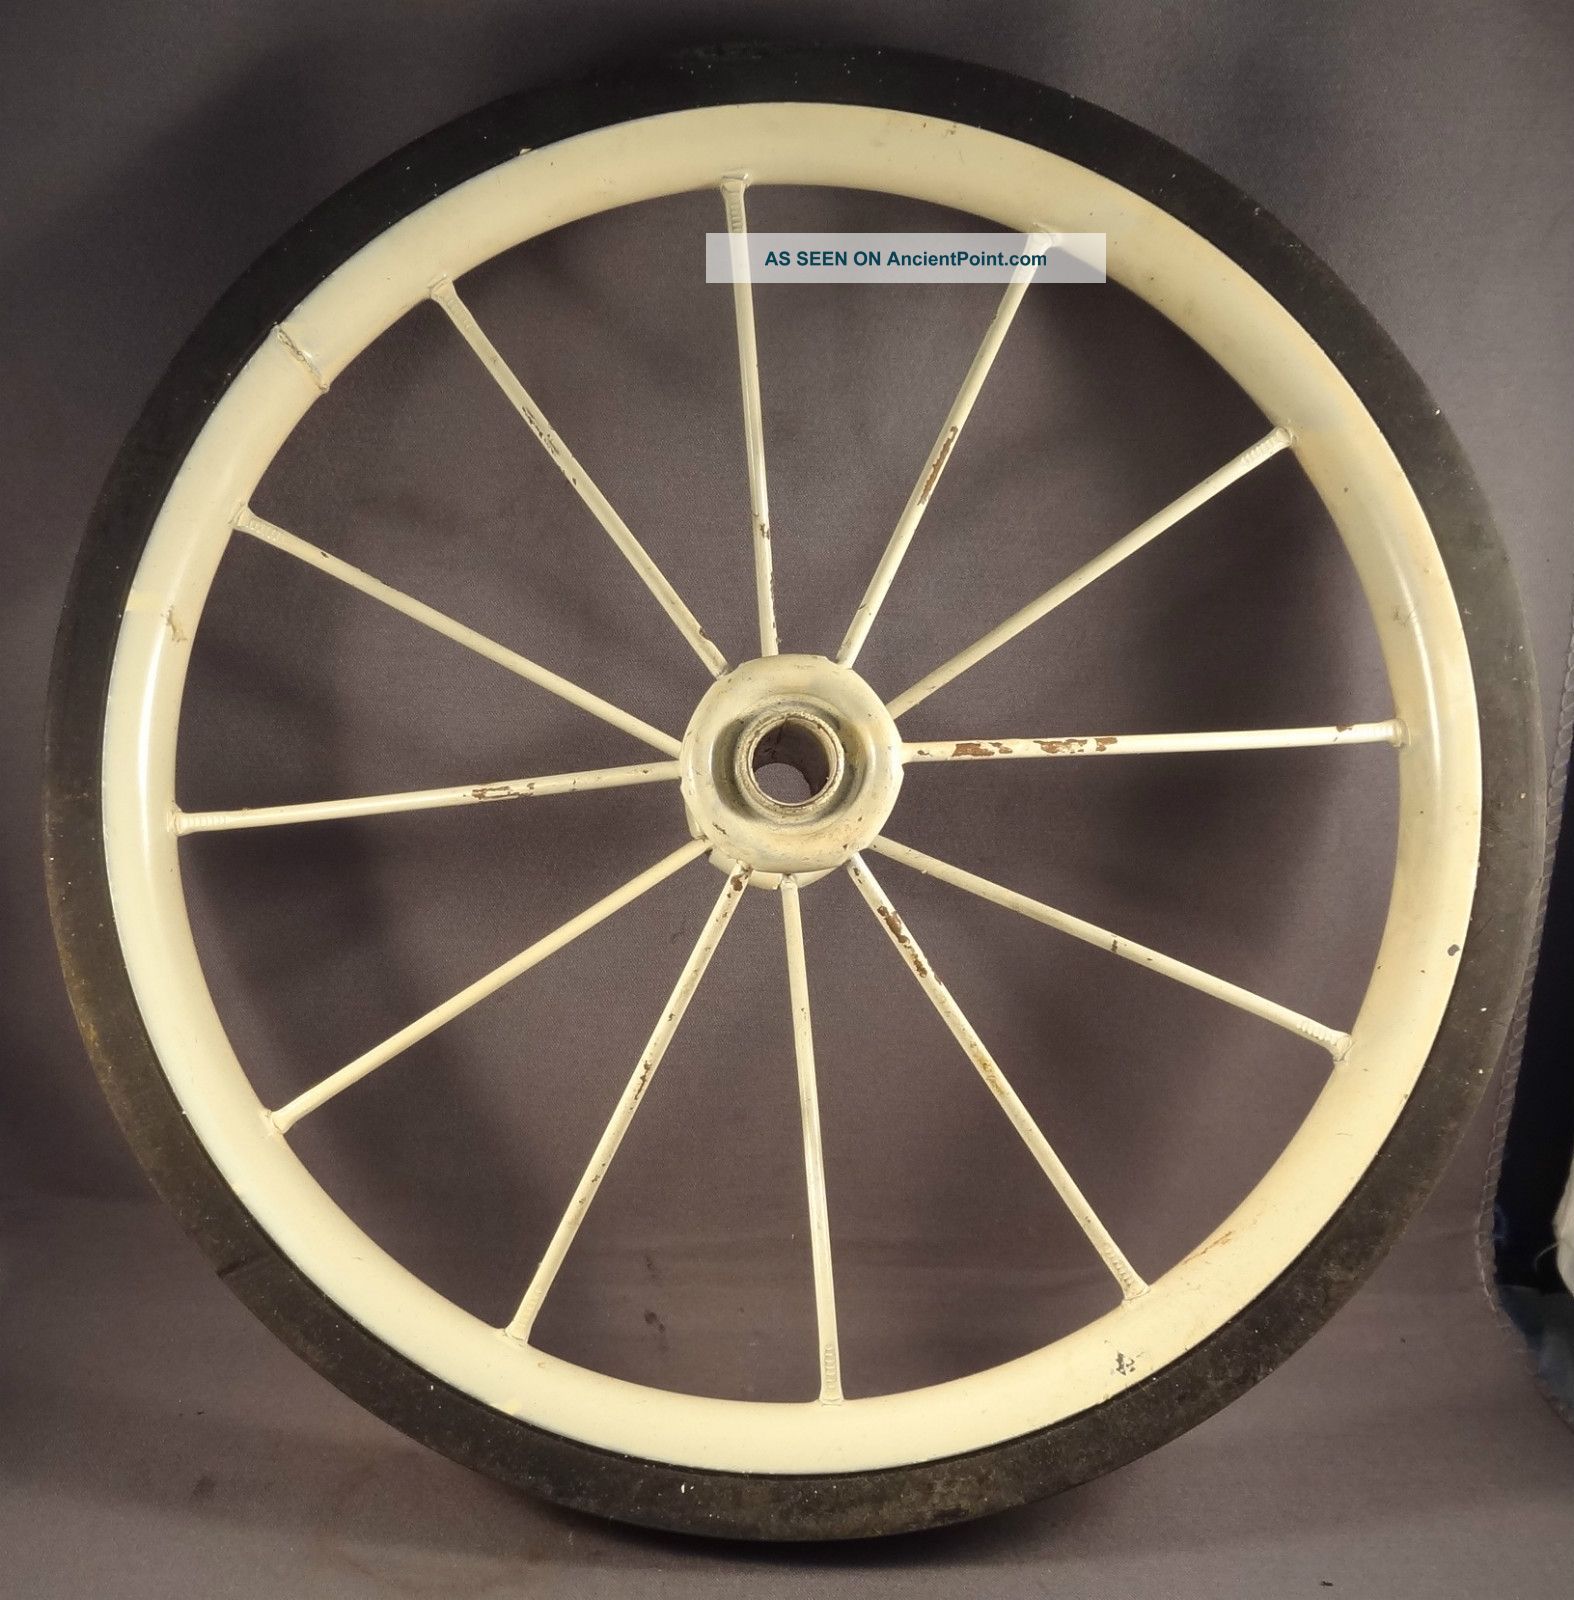 9 Inch Wheel Semi Pheumatic Tire For Vintage Trike Tricycle Baby Carriage Hanson Baby Carriages & Buggies photo